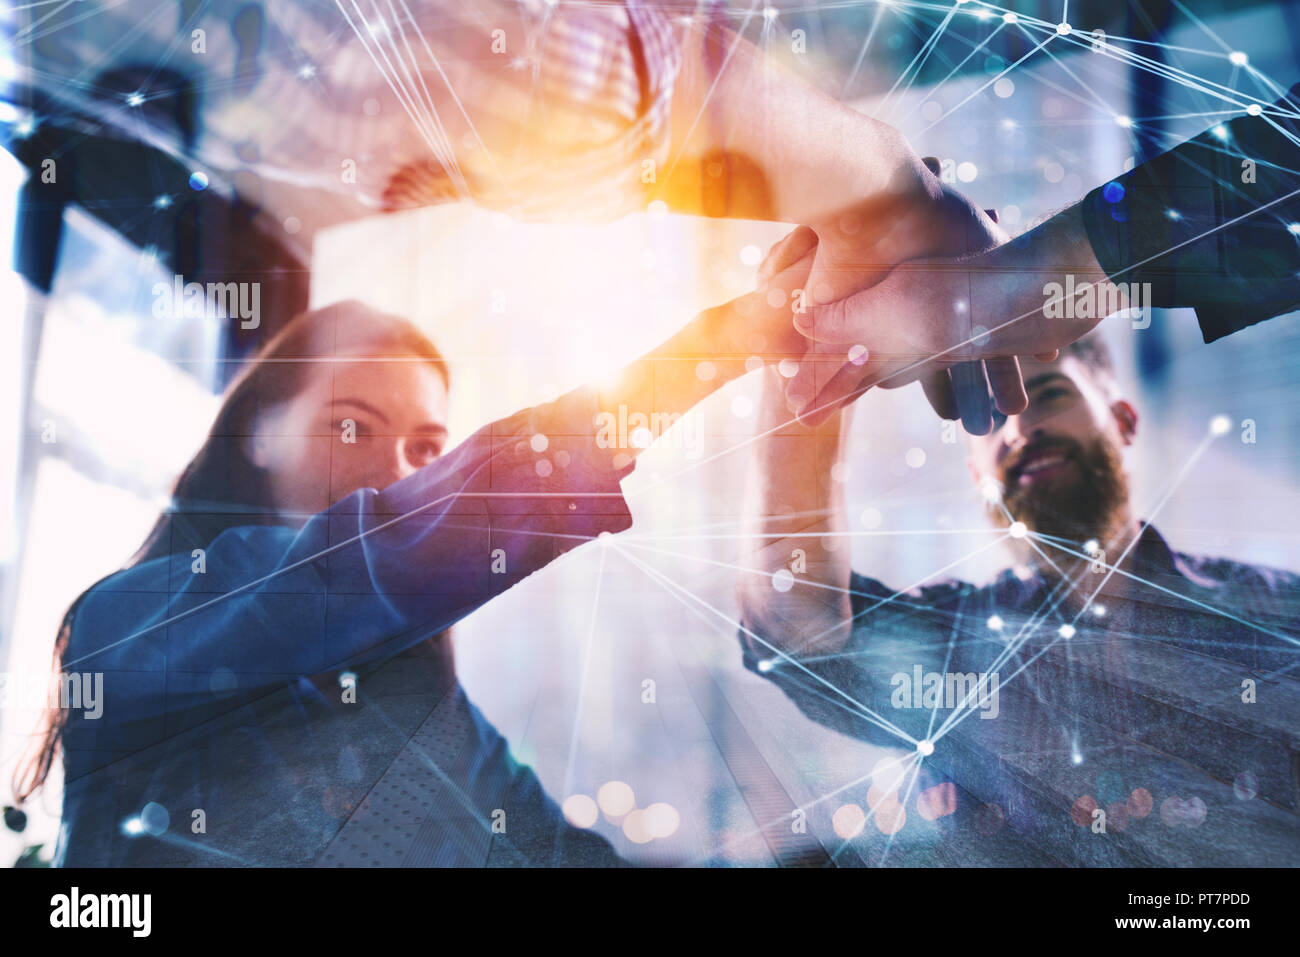 Handshaking business person in office. concept of teamwork and partnership. double exposure with light effects Stock Photo